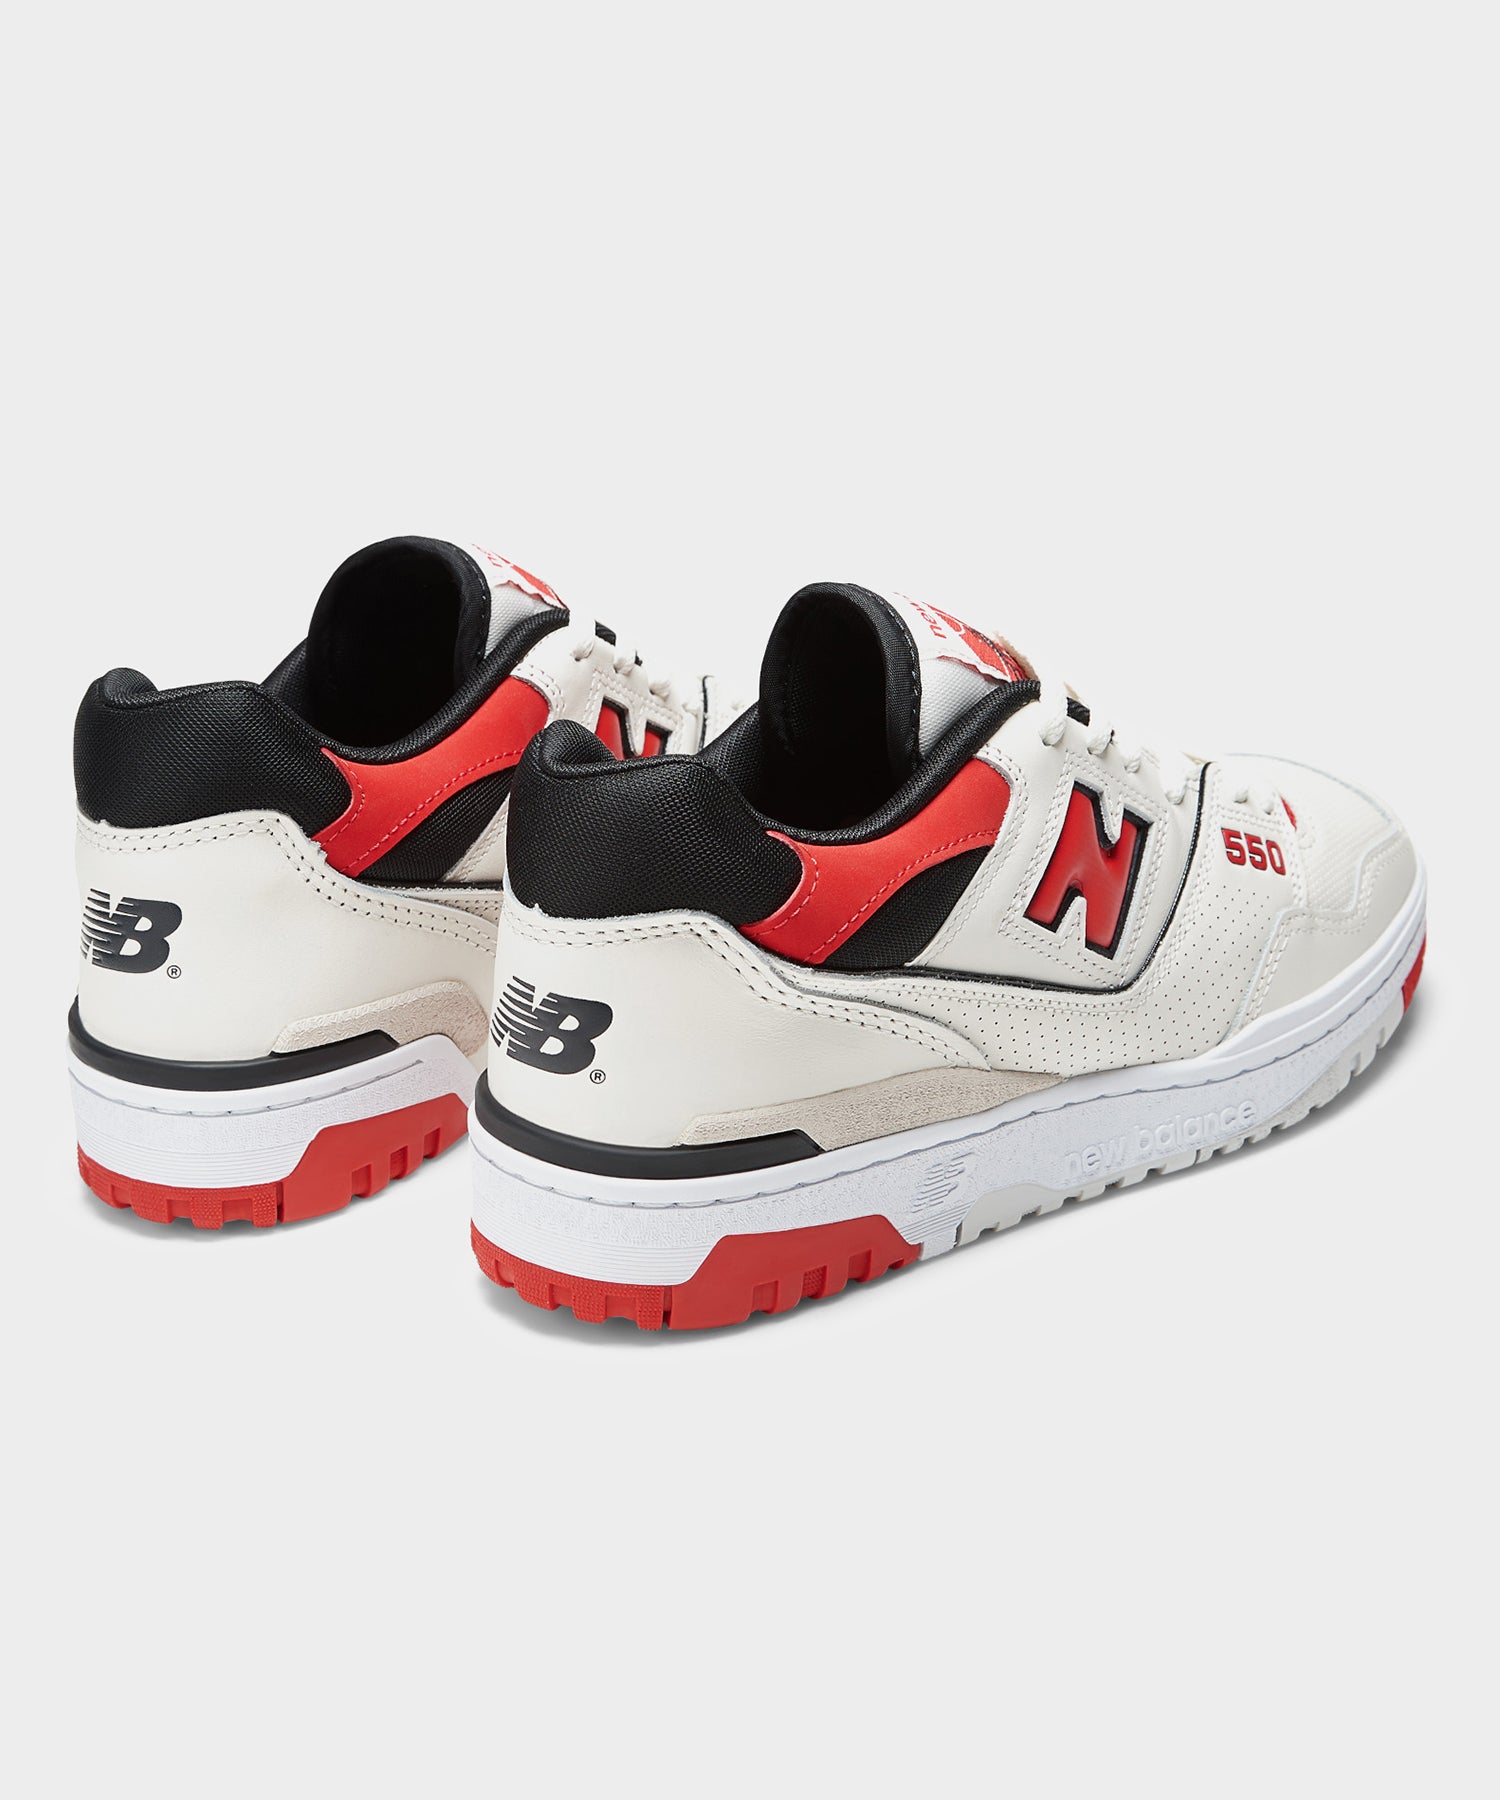 New Balance 550 Black & Red Release Date & Info